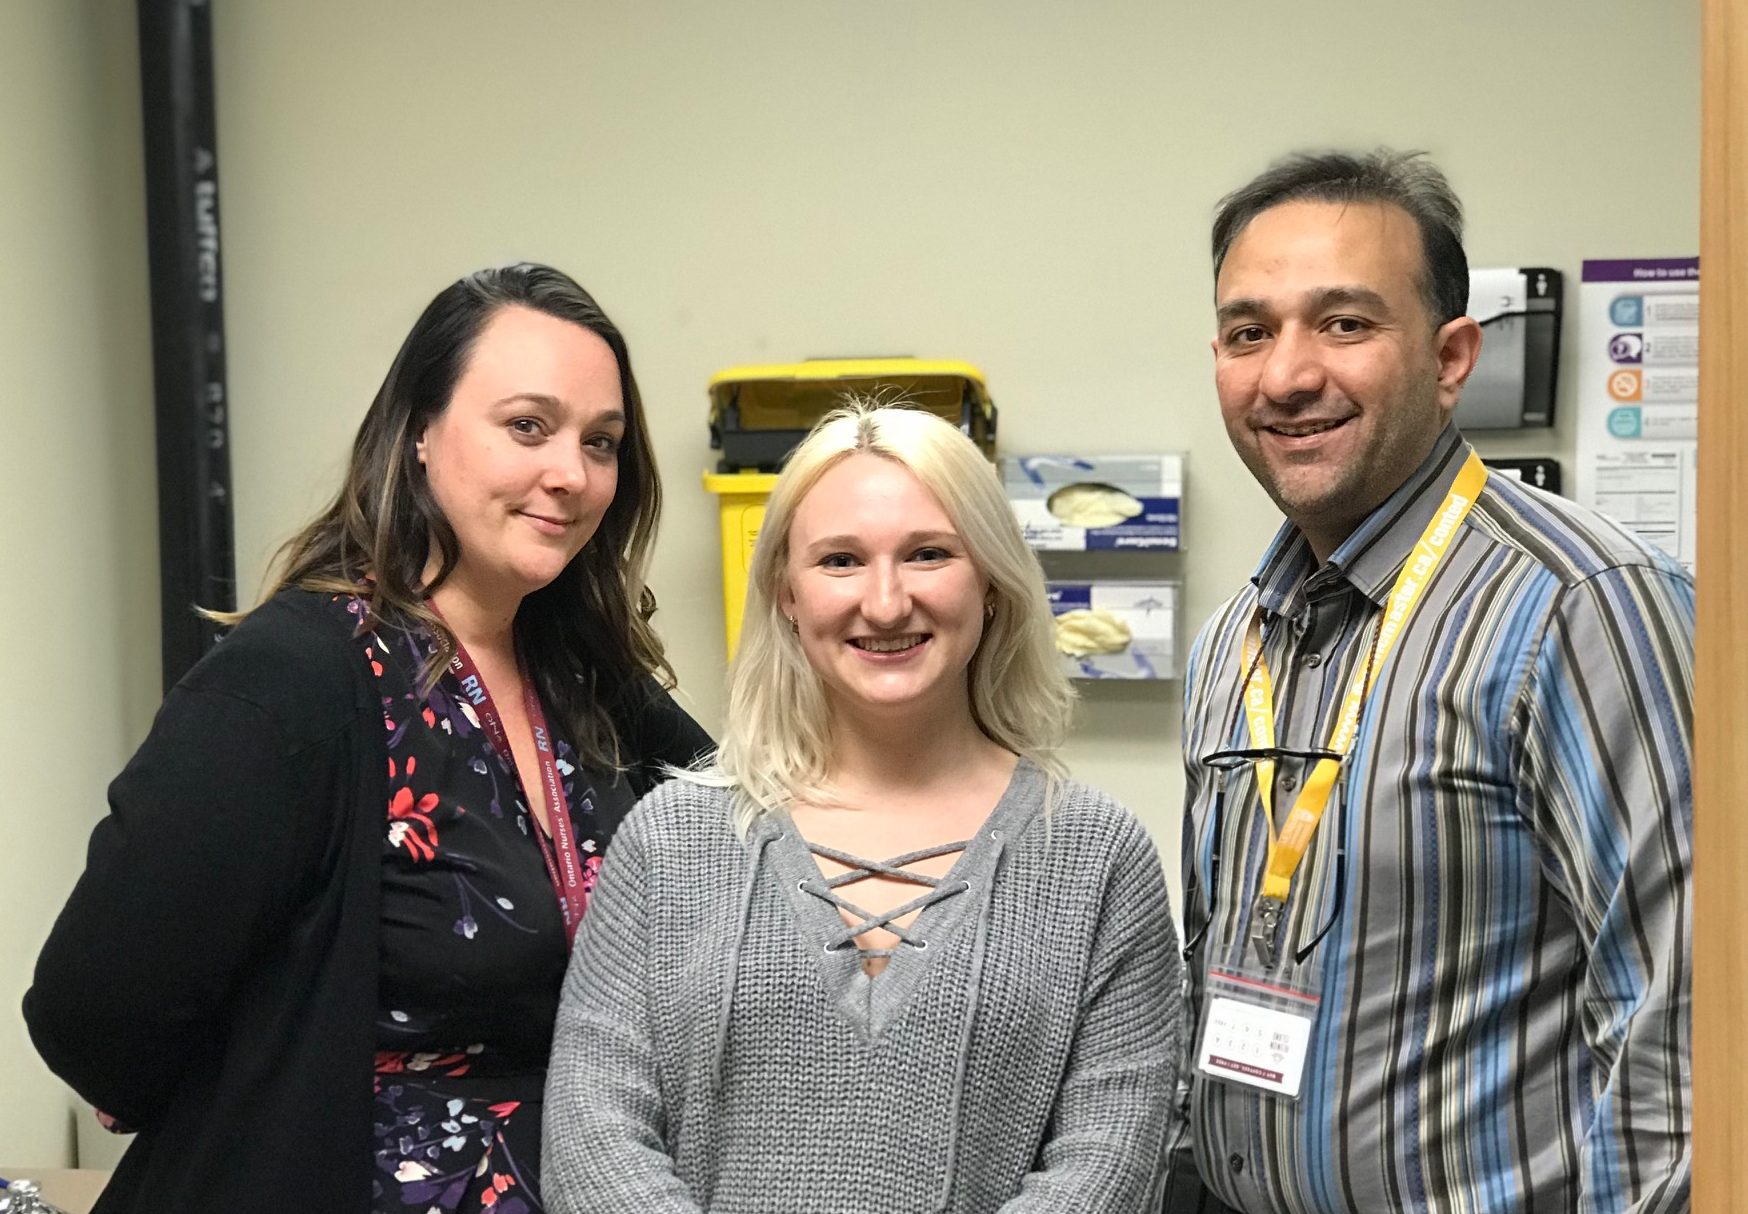 Nurse Ashley Fournier, patient Katie McMurrough and Dr. Ahmed Attar pose together in an exam room